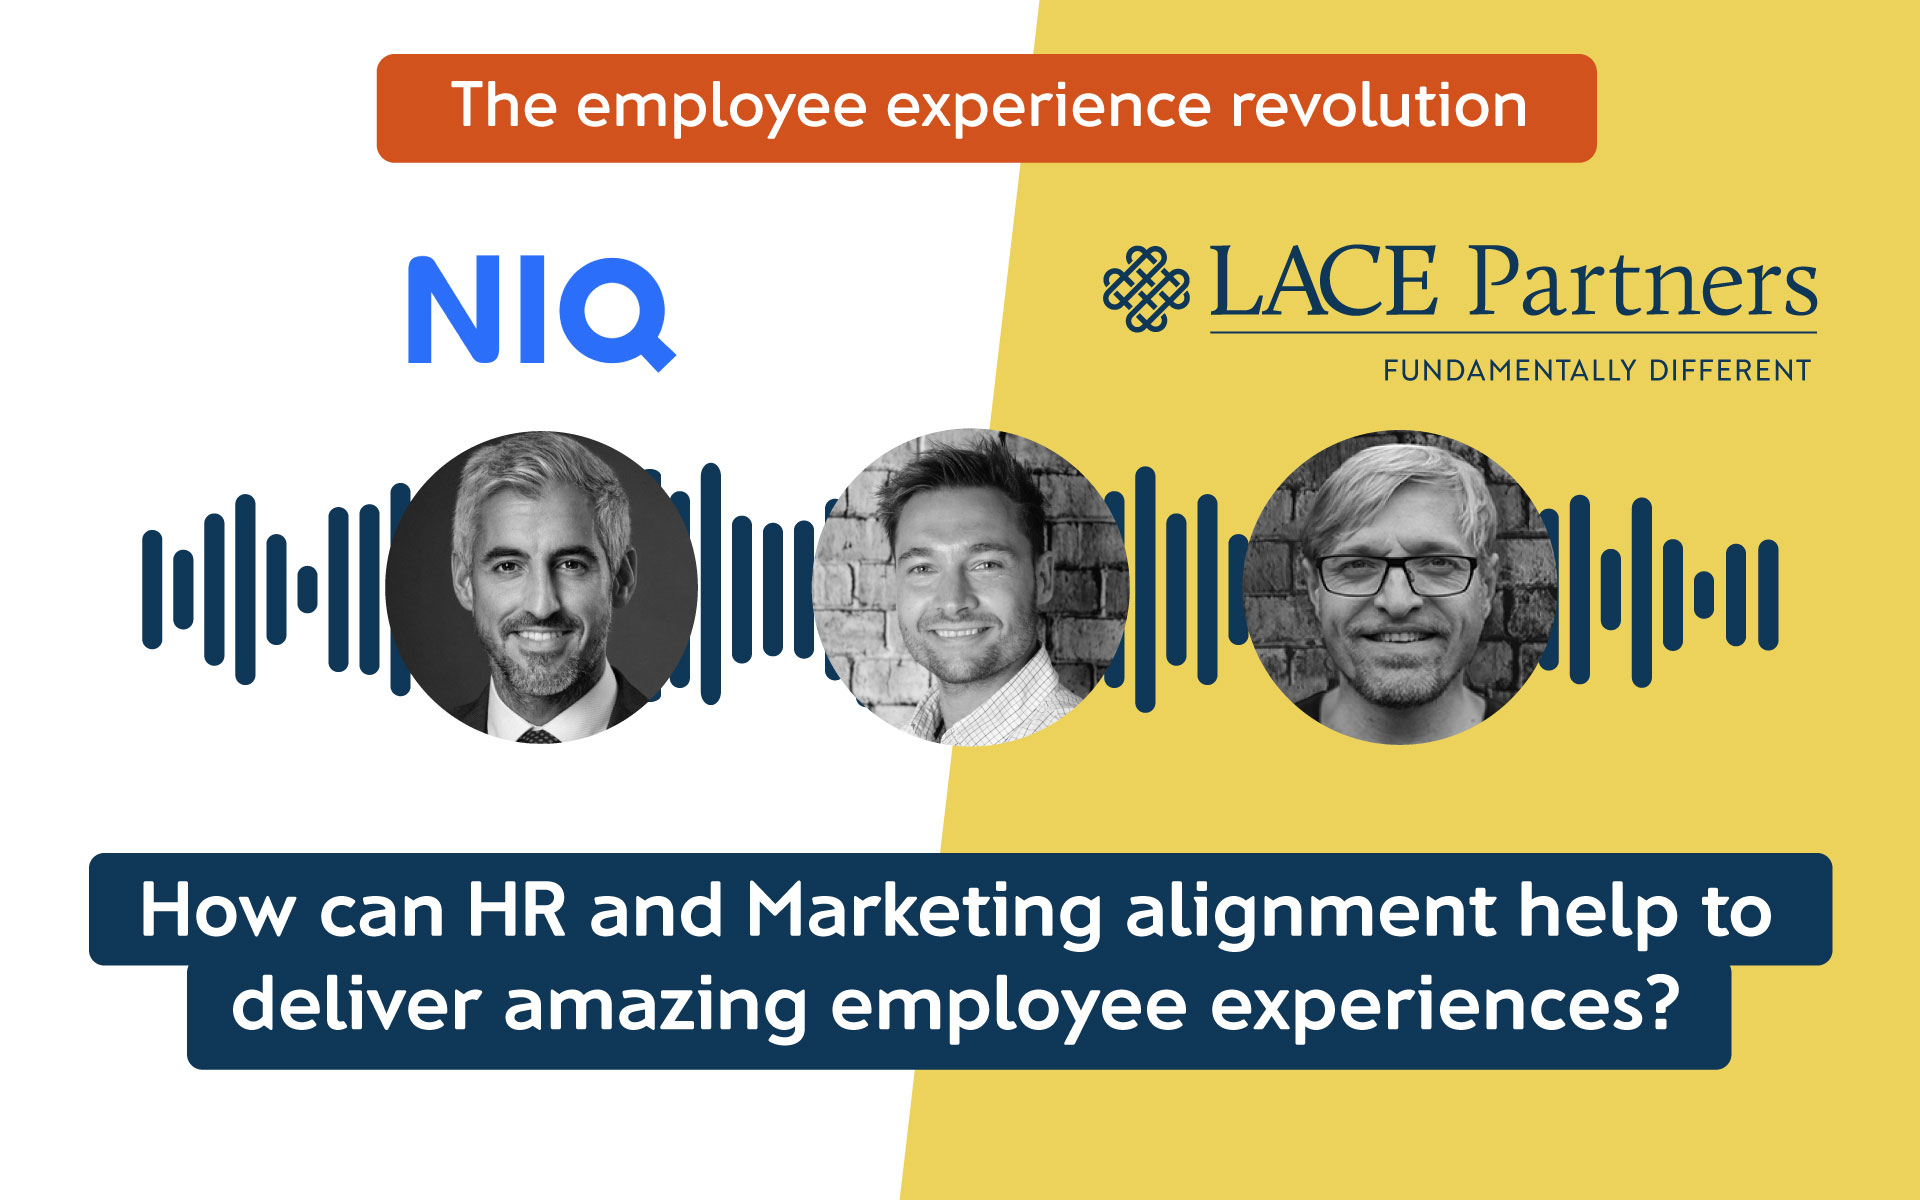 How can HR and Marketing alignment help to deliver amazing employee experiences?